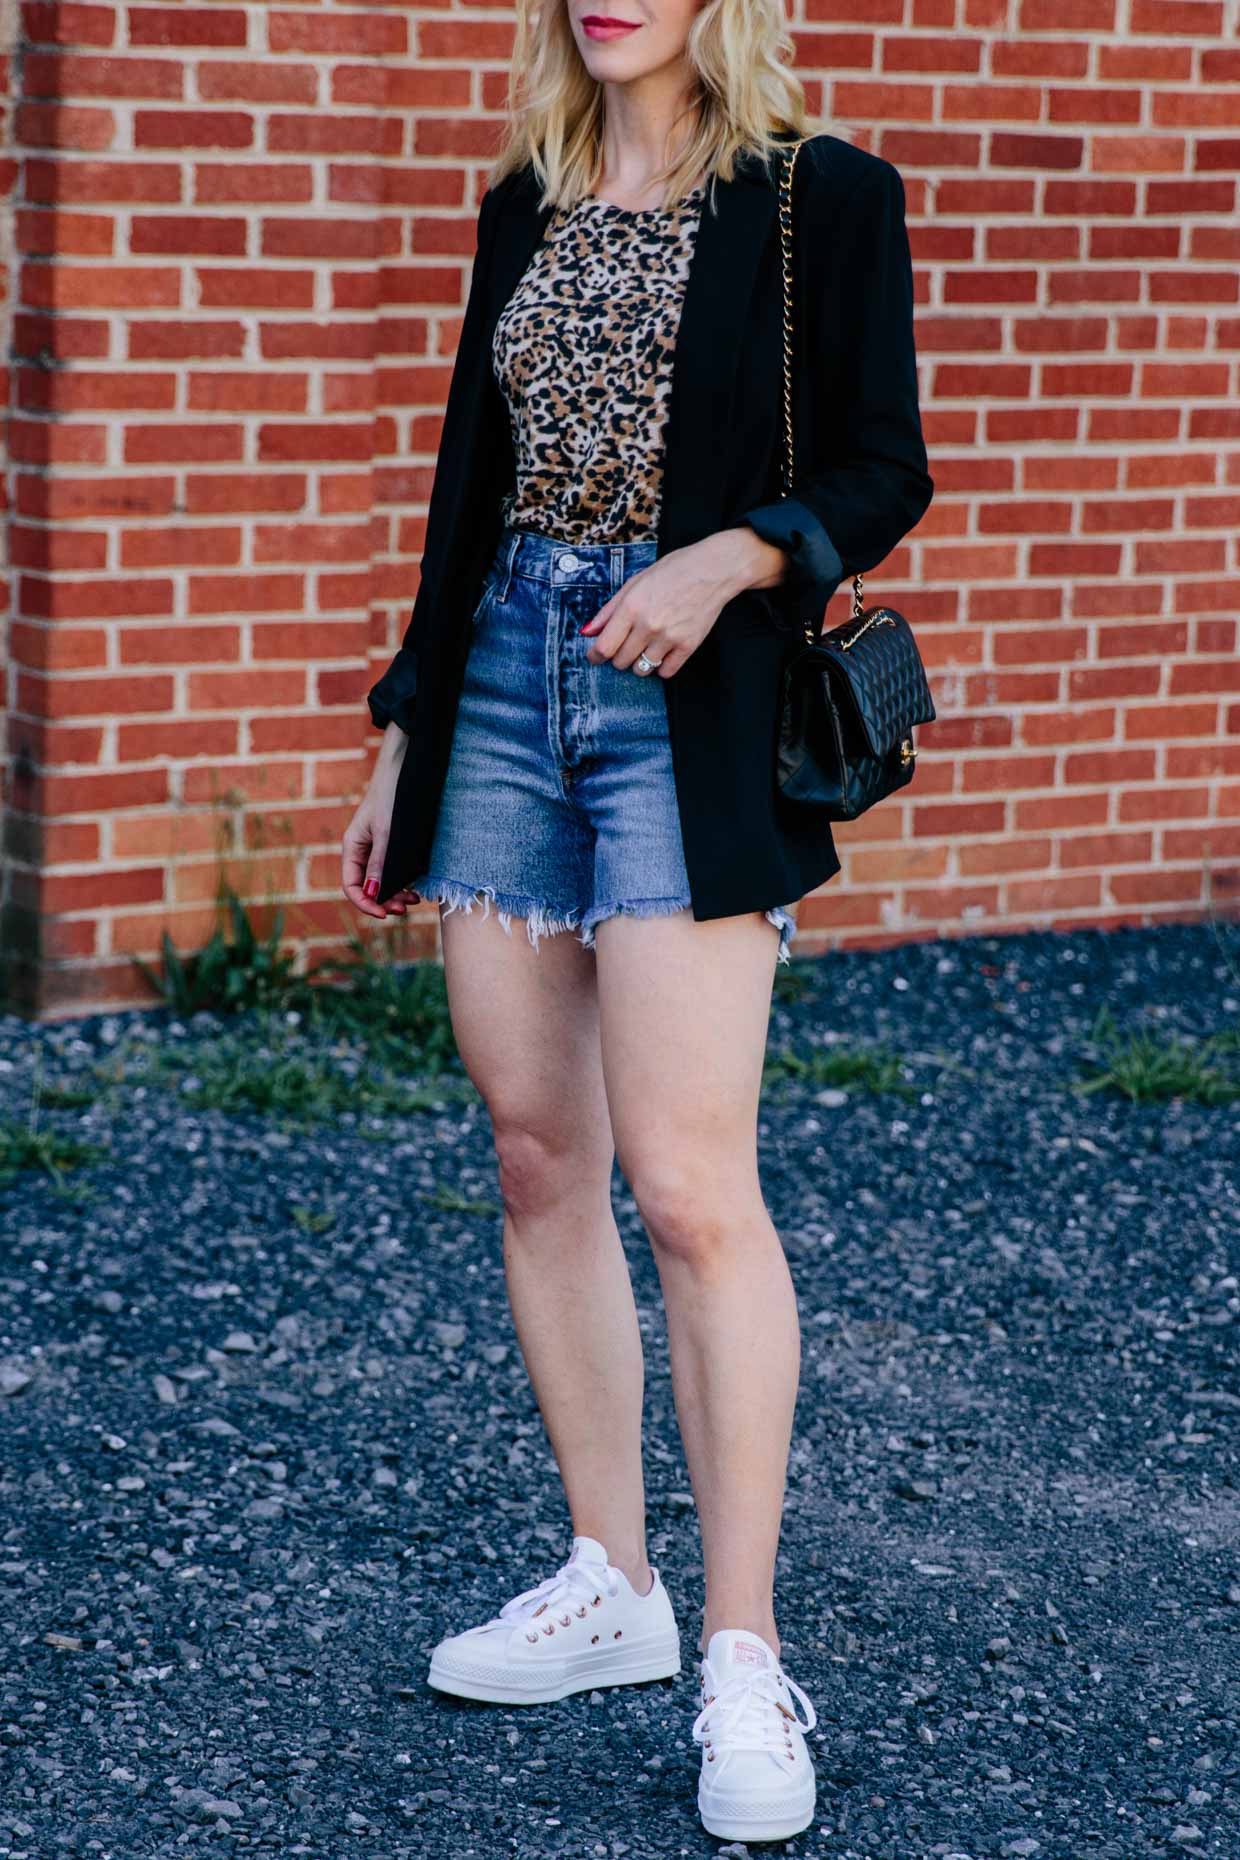 Meagan Brandon fashion blogger of Meagan's Moda wears an oversized black  blazer with leopard print tee, high waist denim shorts and white sneakers  for casual chic blazer outfit - Meagan's Moda